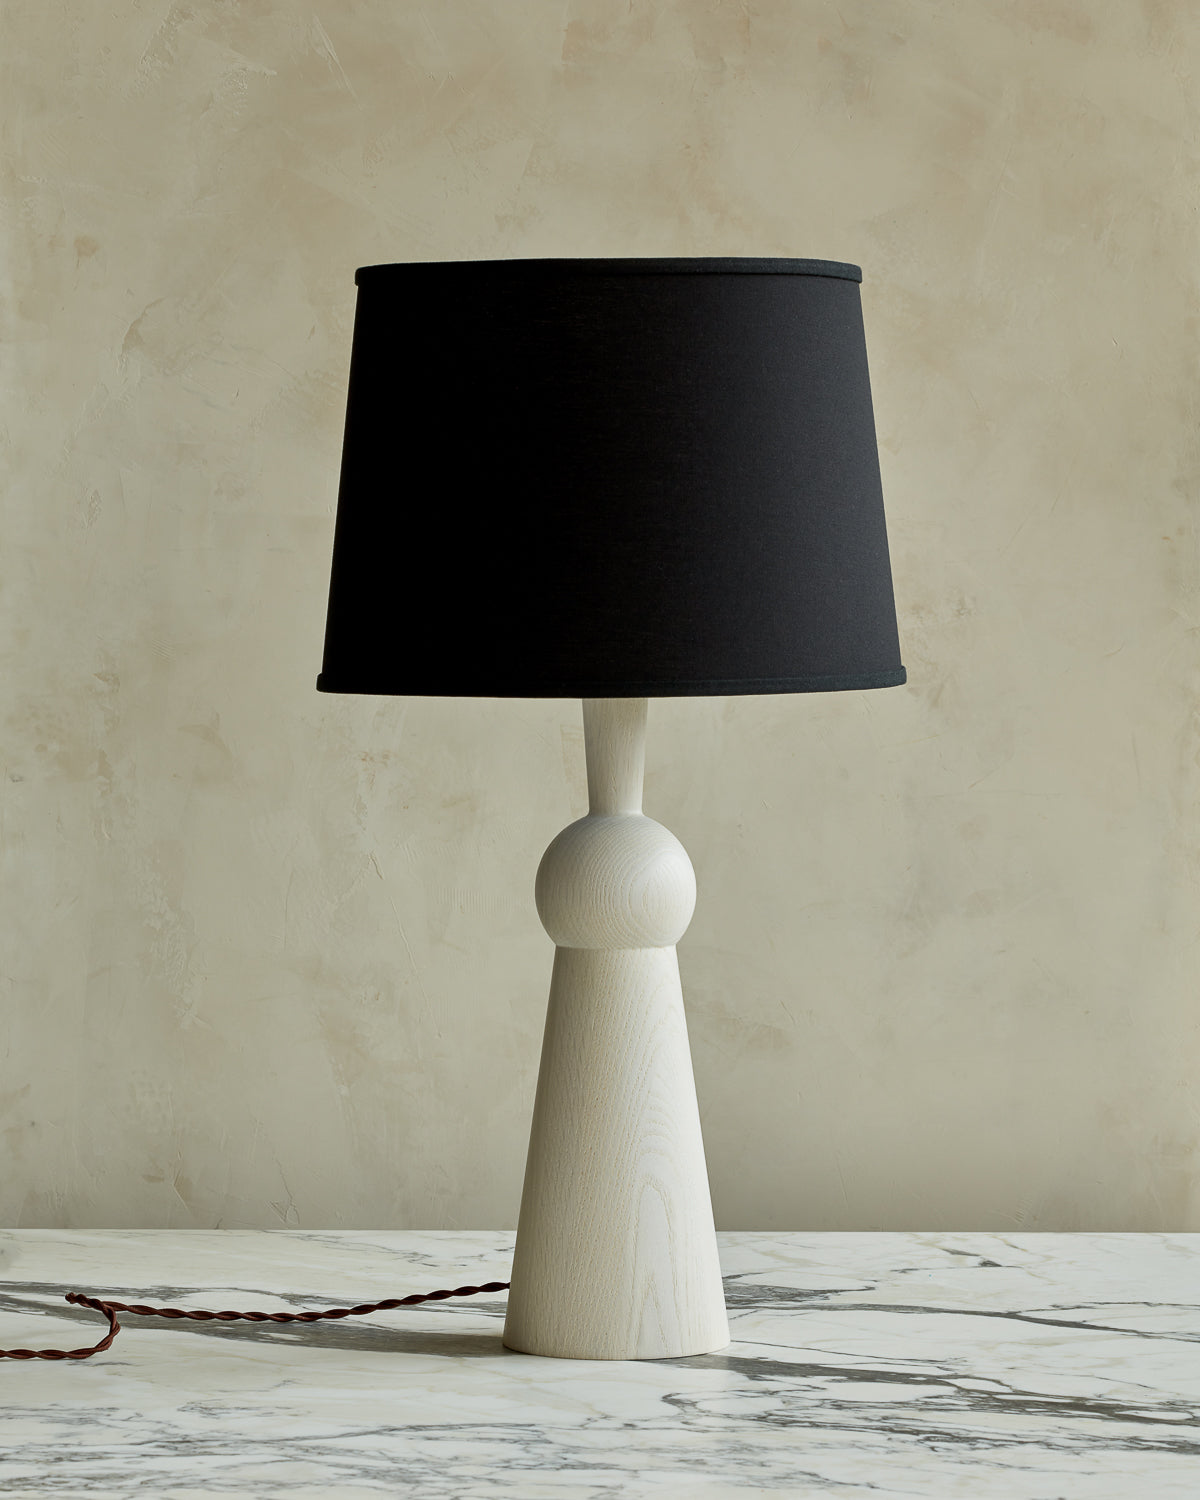 White wash solid wood table lamp with gently tapered body and black linen shade